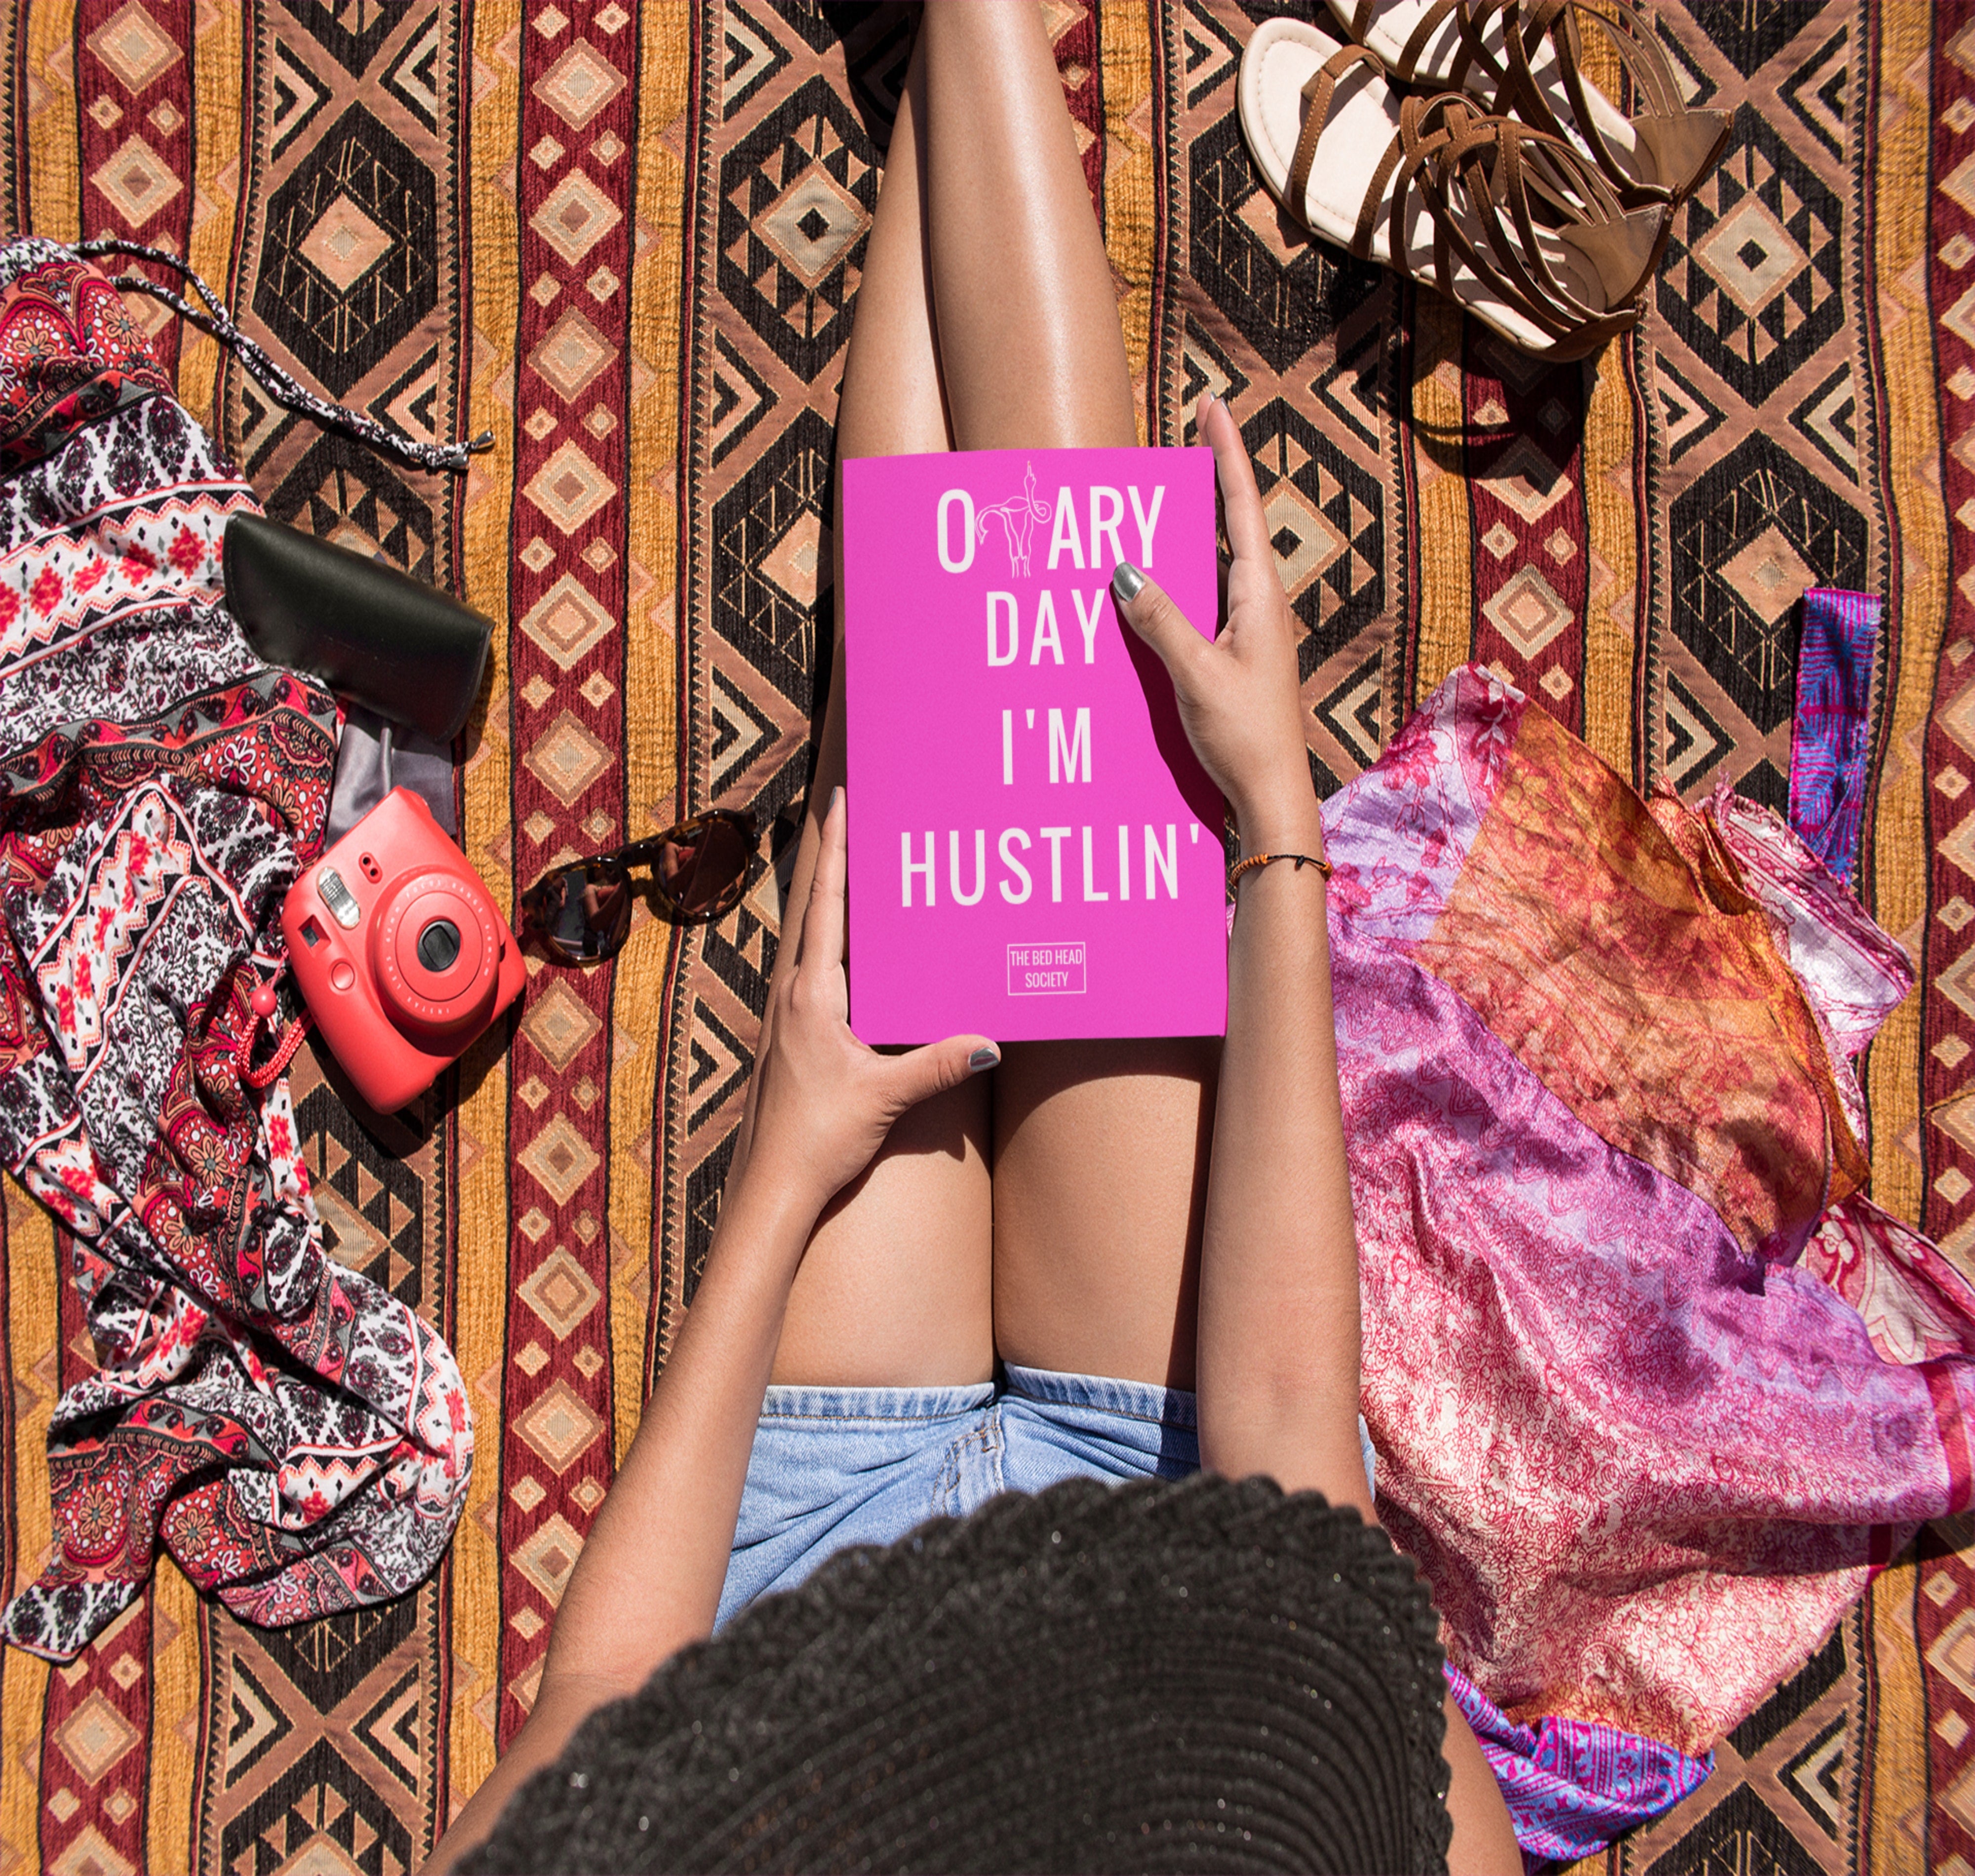 OVARY DAY I'M HUSTLIN' JOURNAL - HOT PINK - Shop Bed Head Society